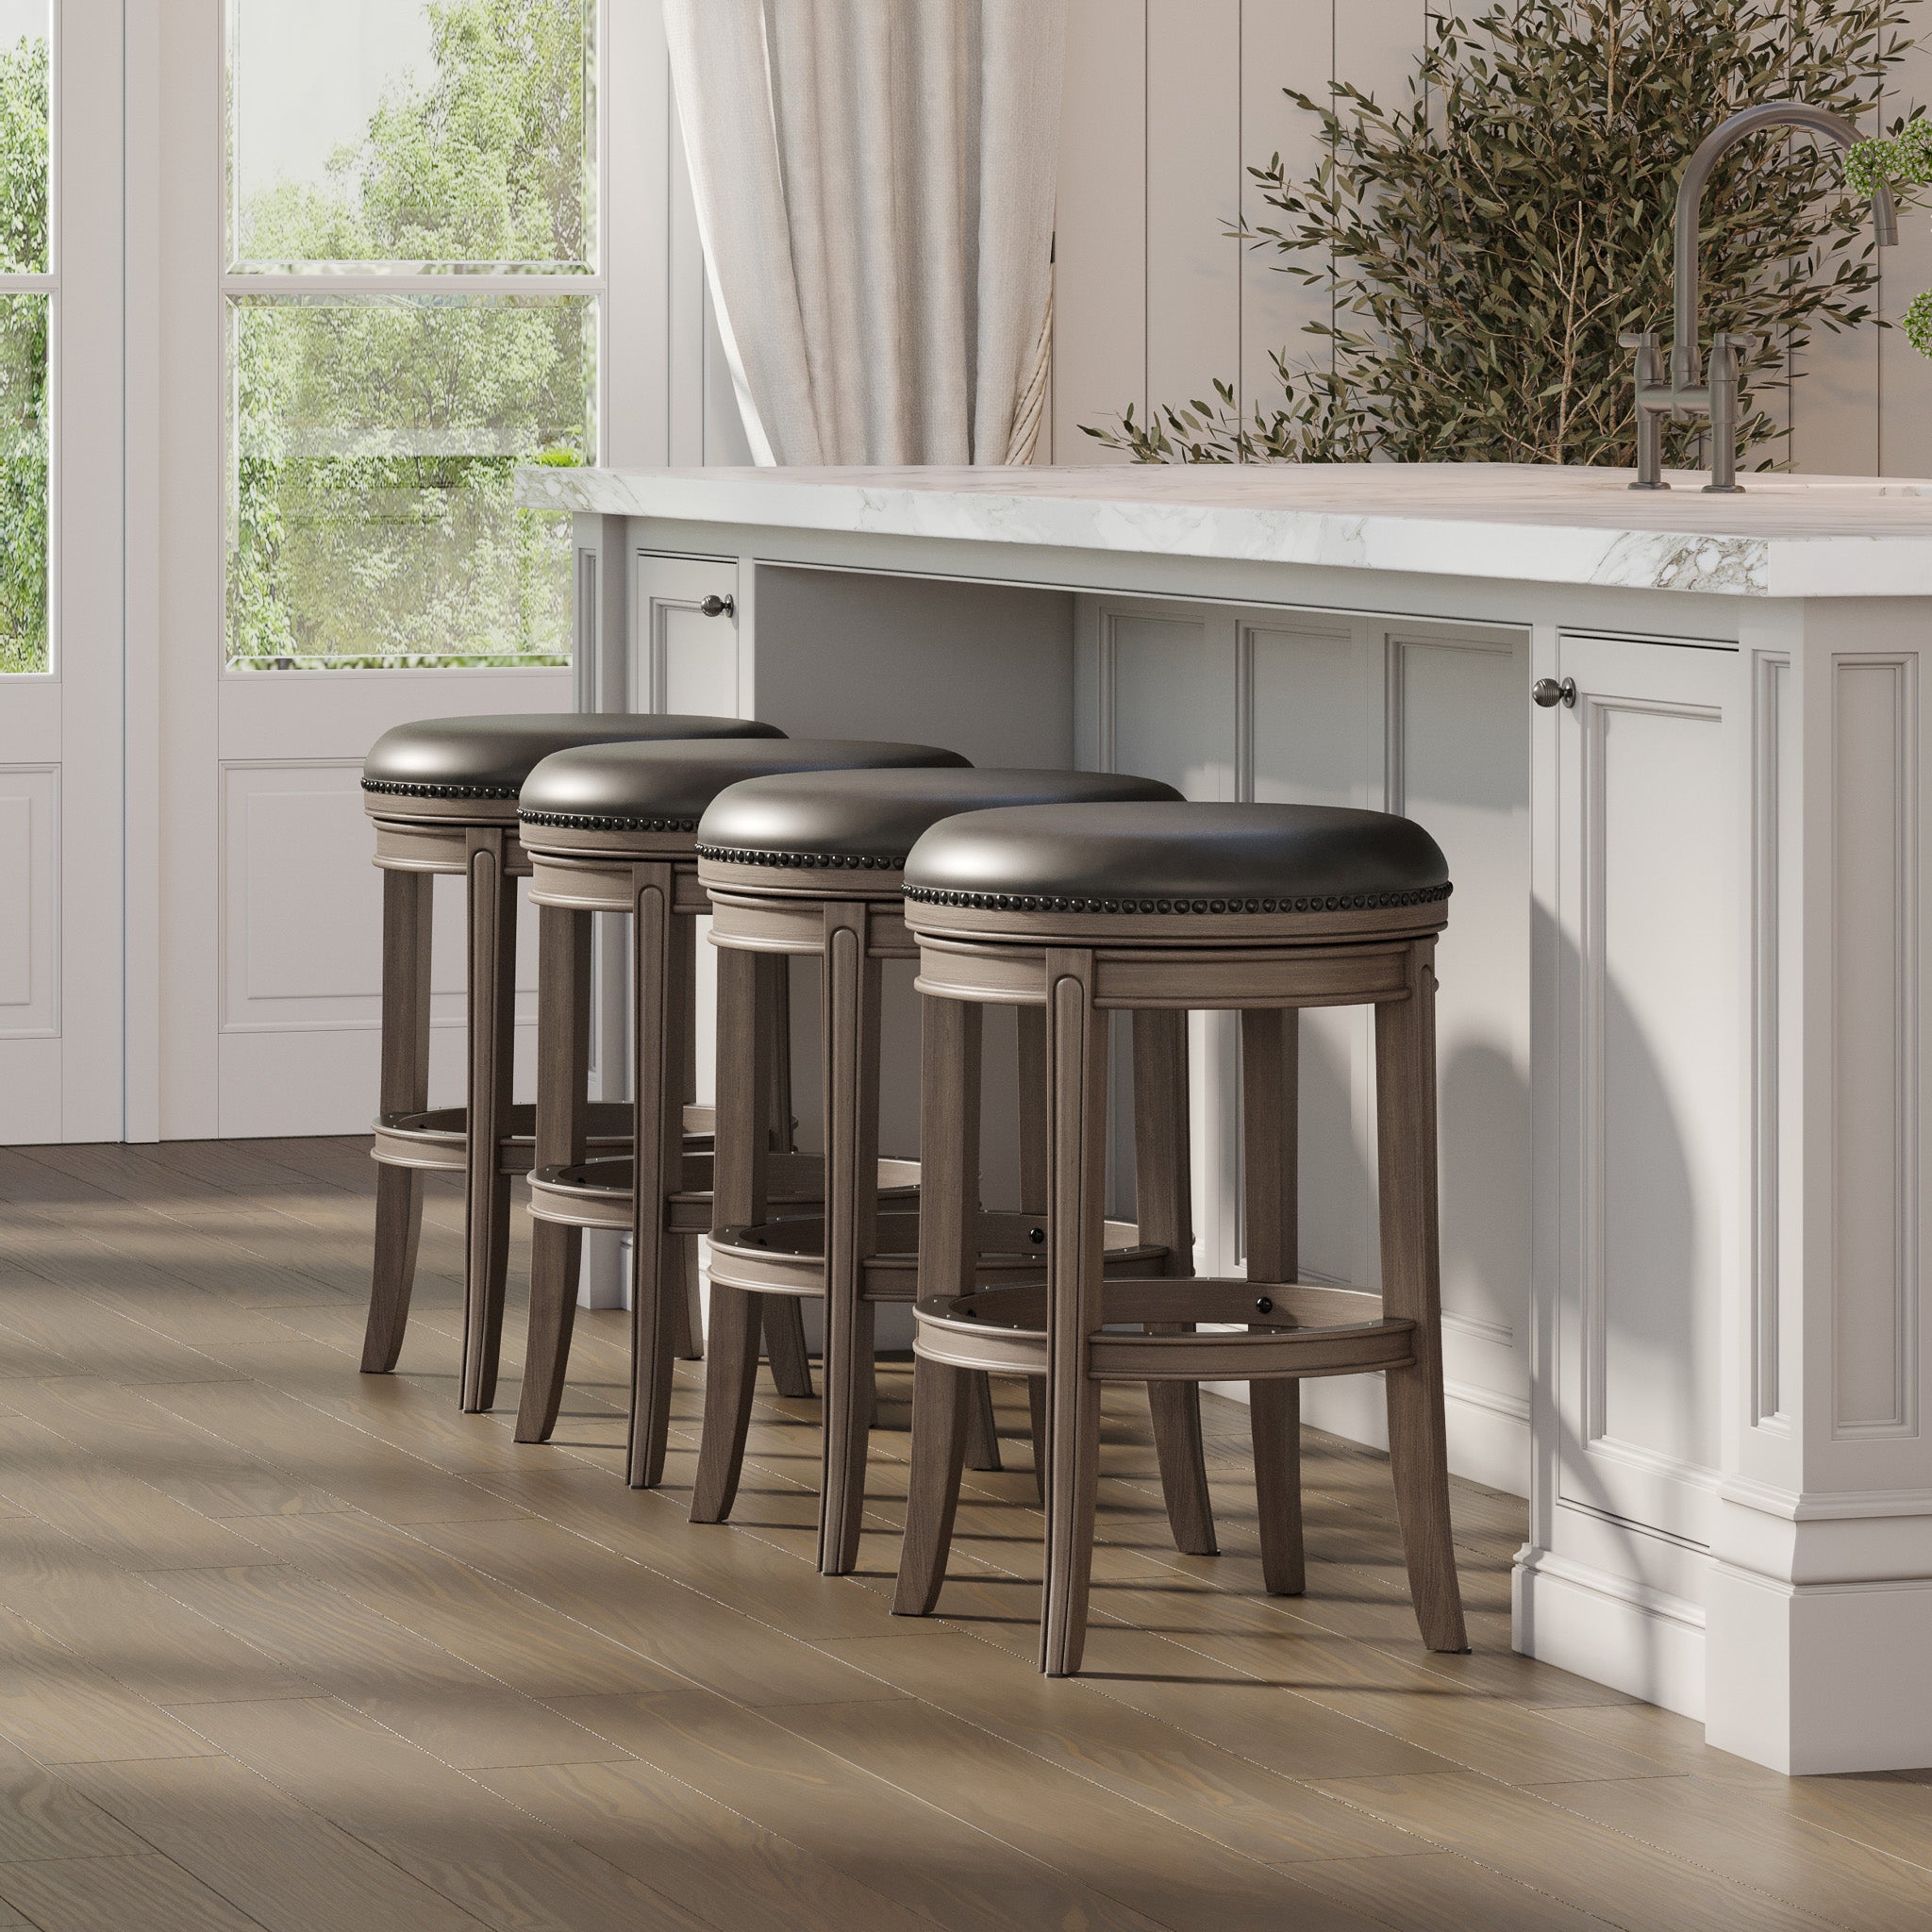 Alexander Backless Bar Stool in Reclaimed Oak Finish with Ronan Stone Vegan Leather in Stools by Maven Lane